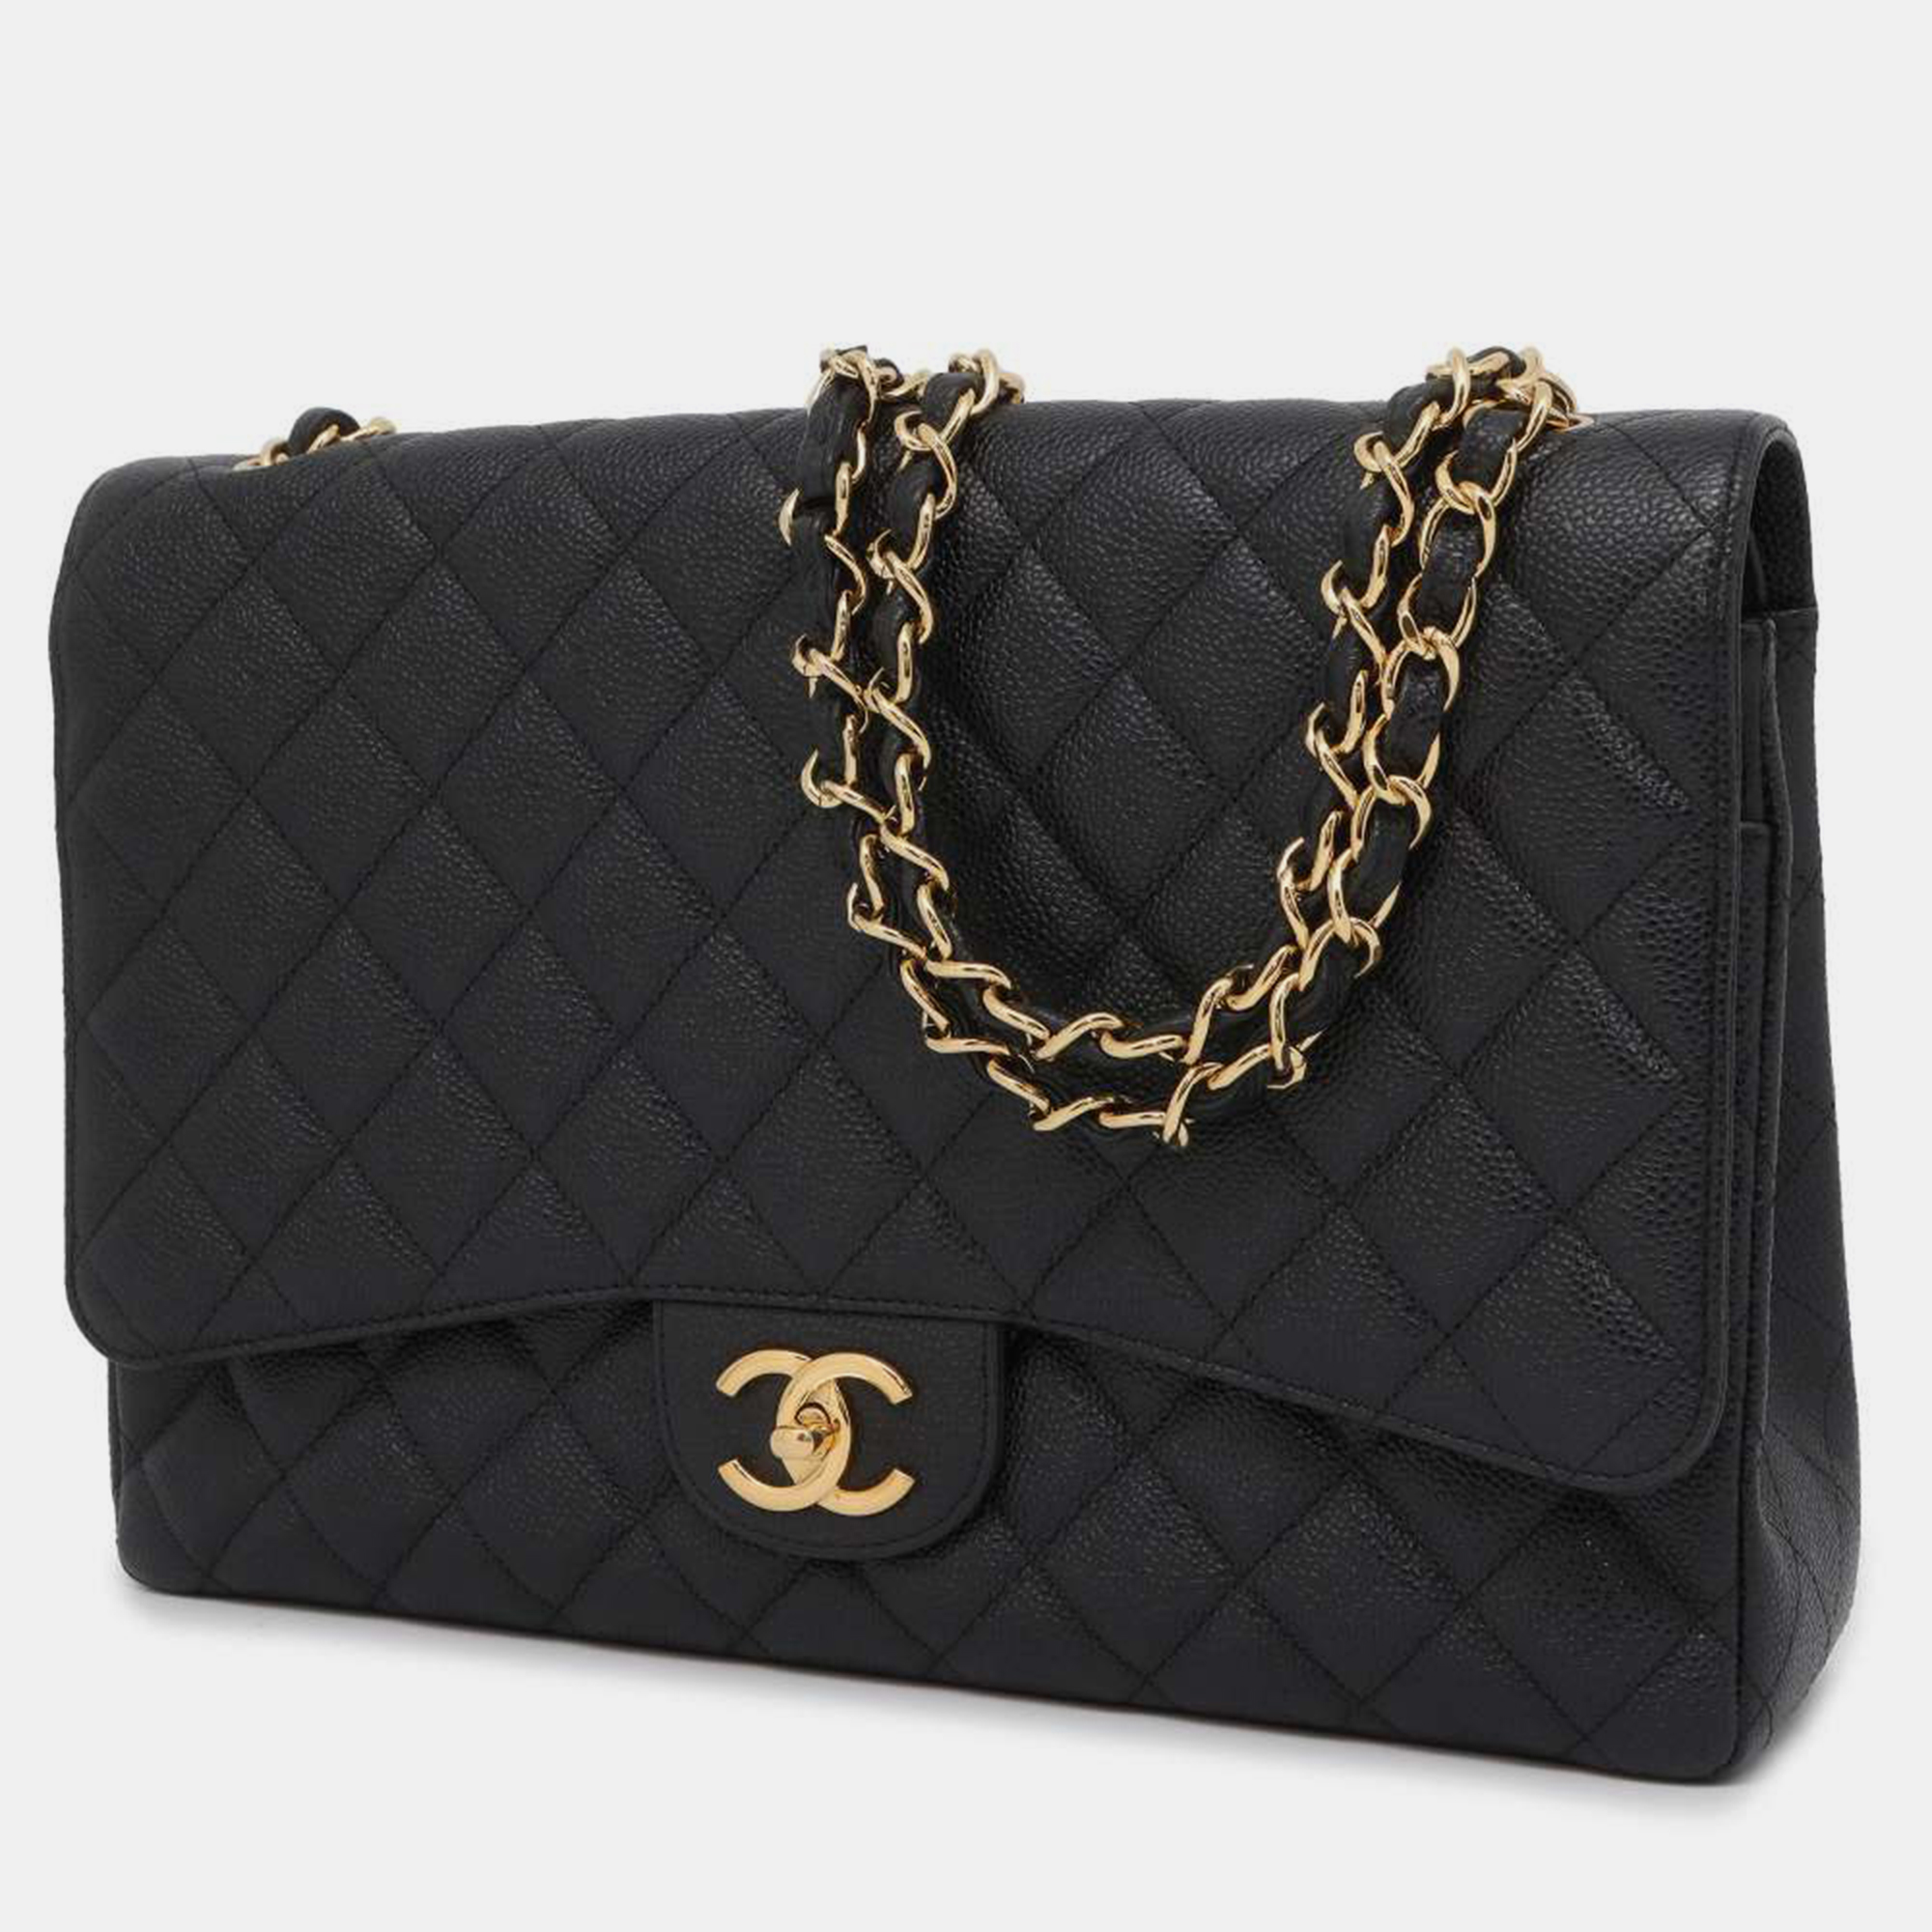 Pre-owned Chanel Black Leather Jumbo Classic Double Flap Shoulder Bag